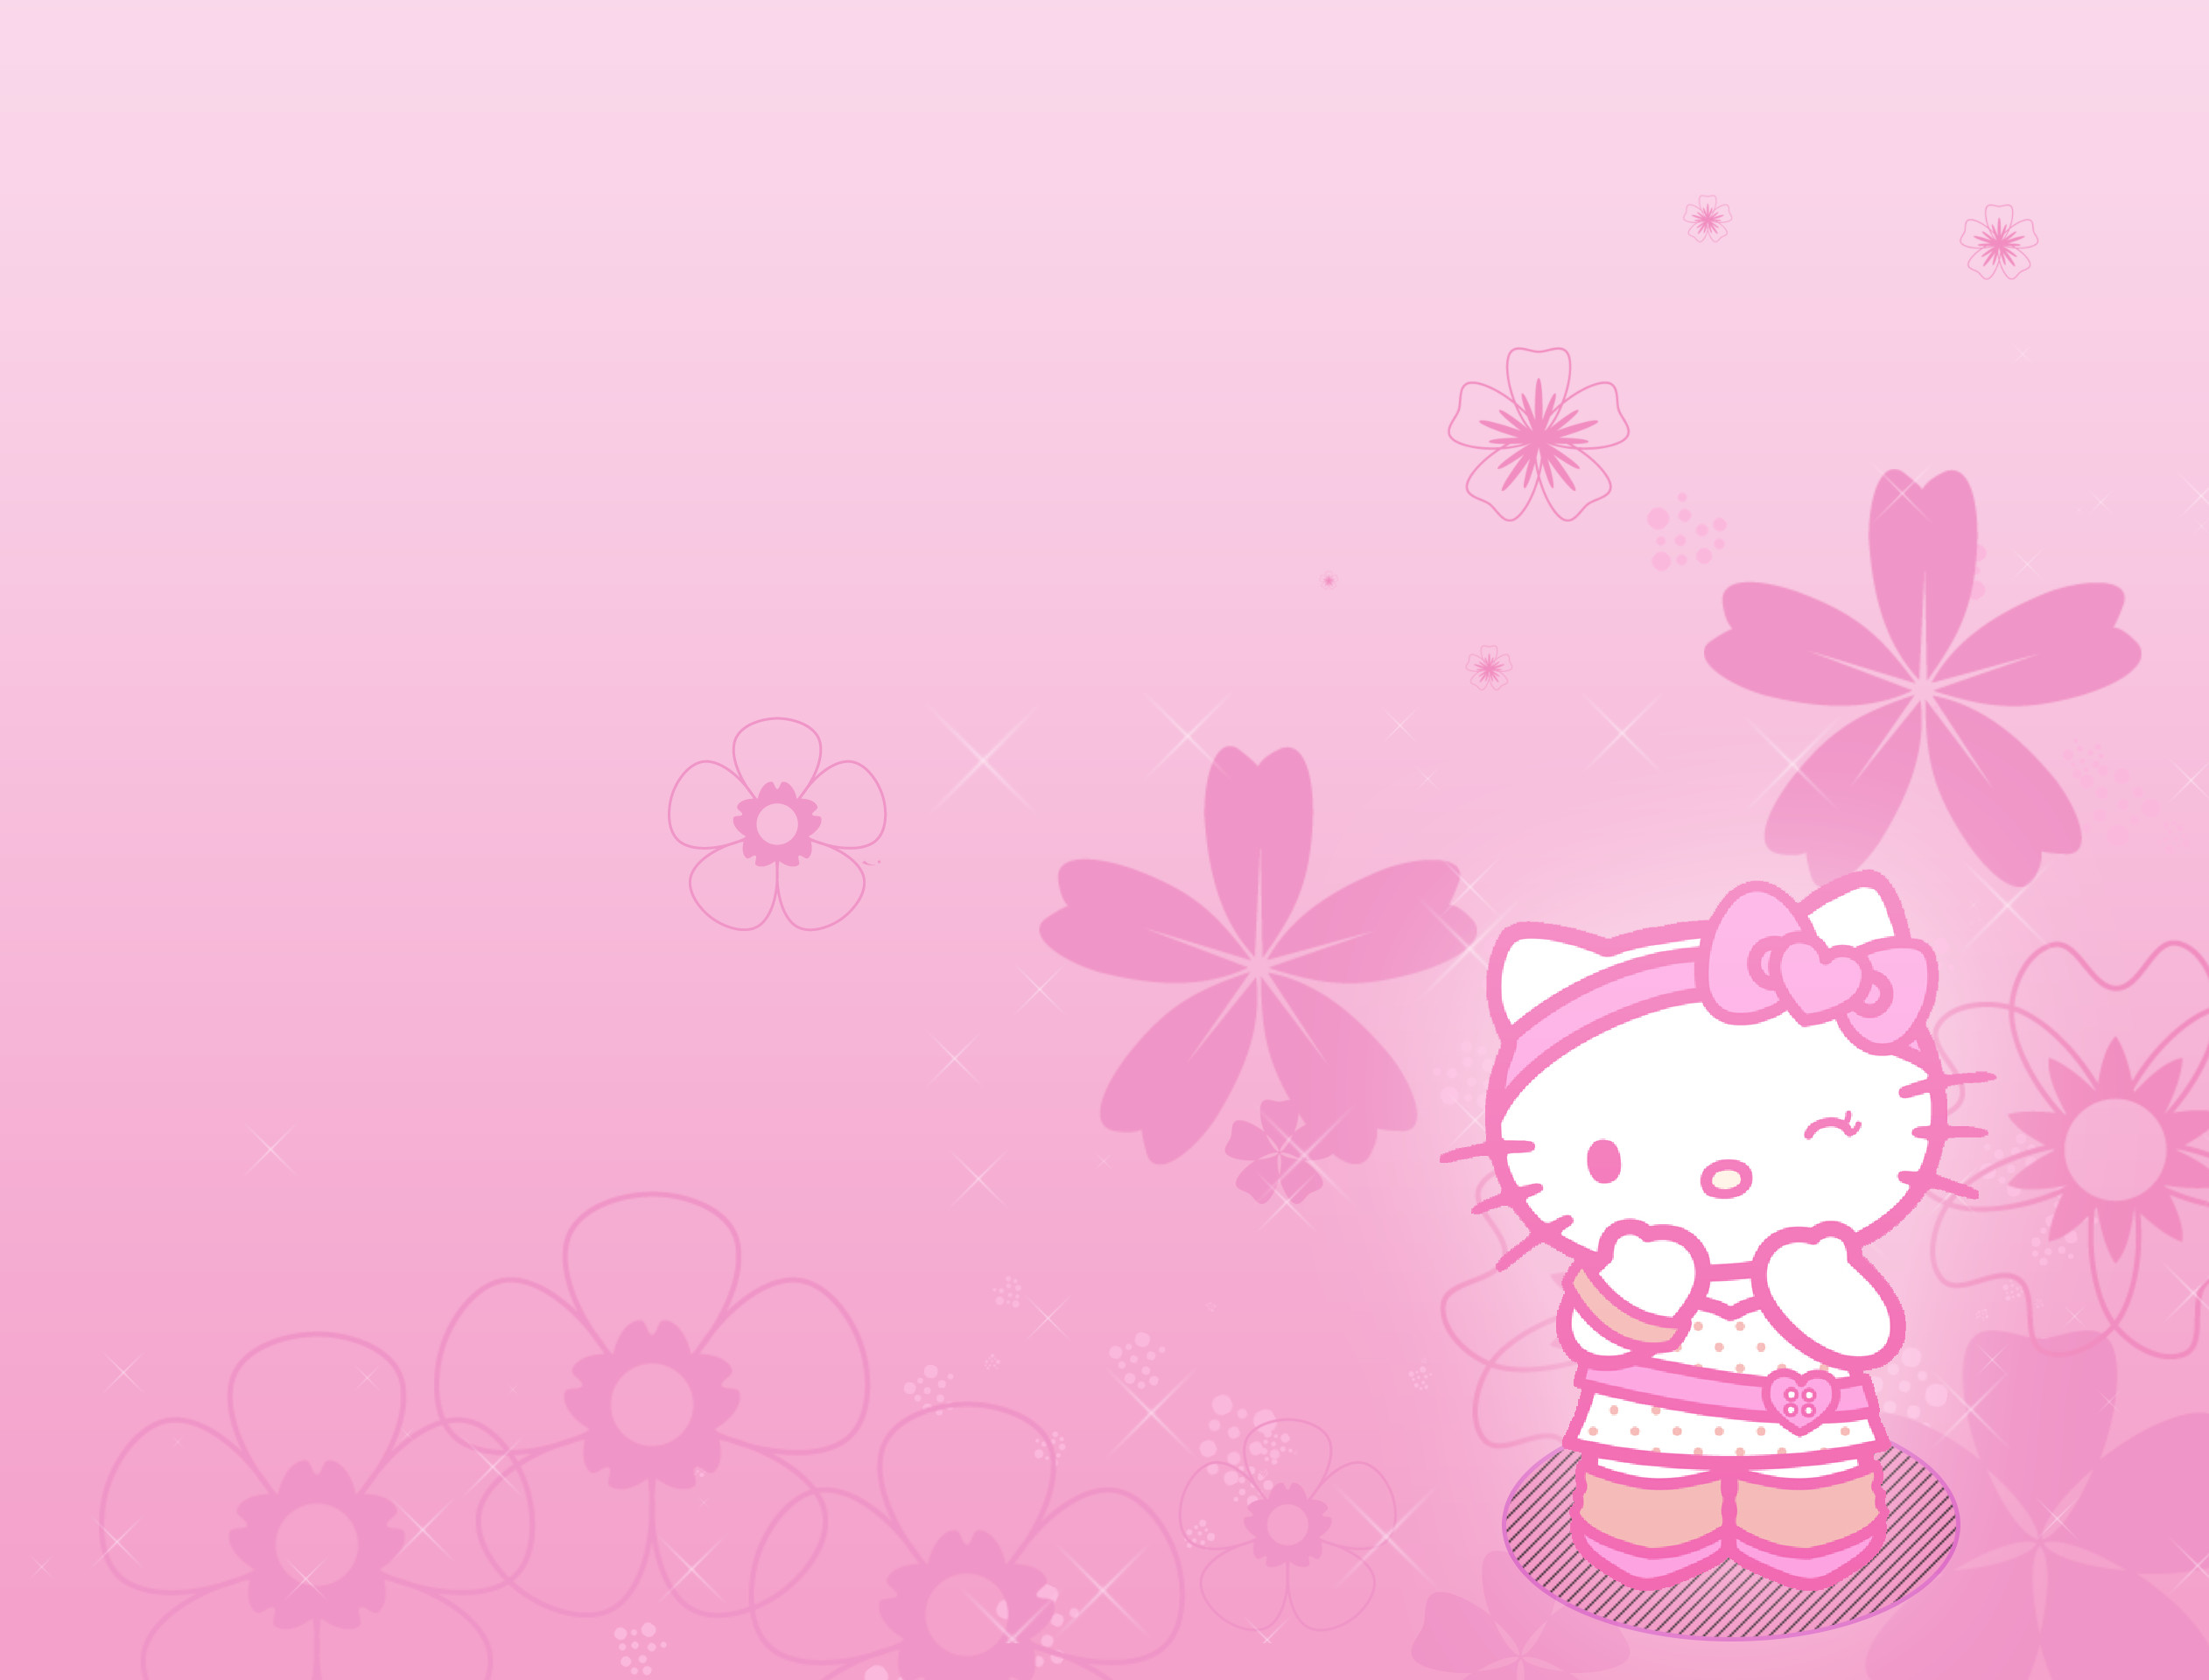 2524x1920 Hello Kitty Wallpaper Iphone by mobi900 Hello Kitty Wallpaper Iphone by  mobi900